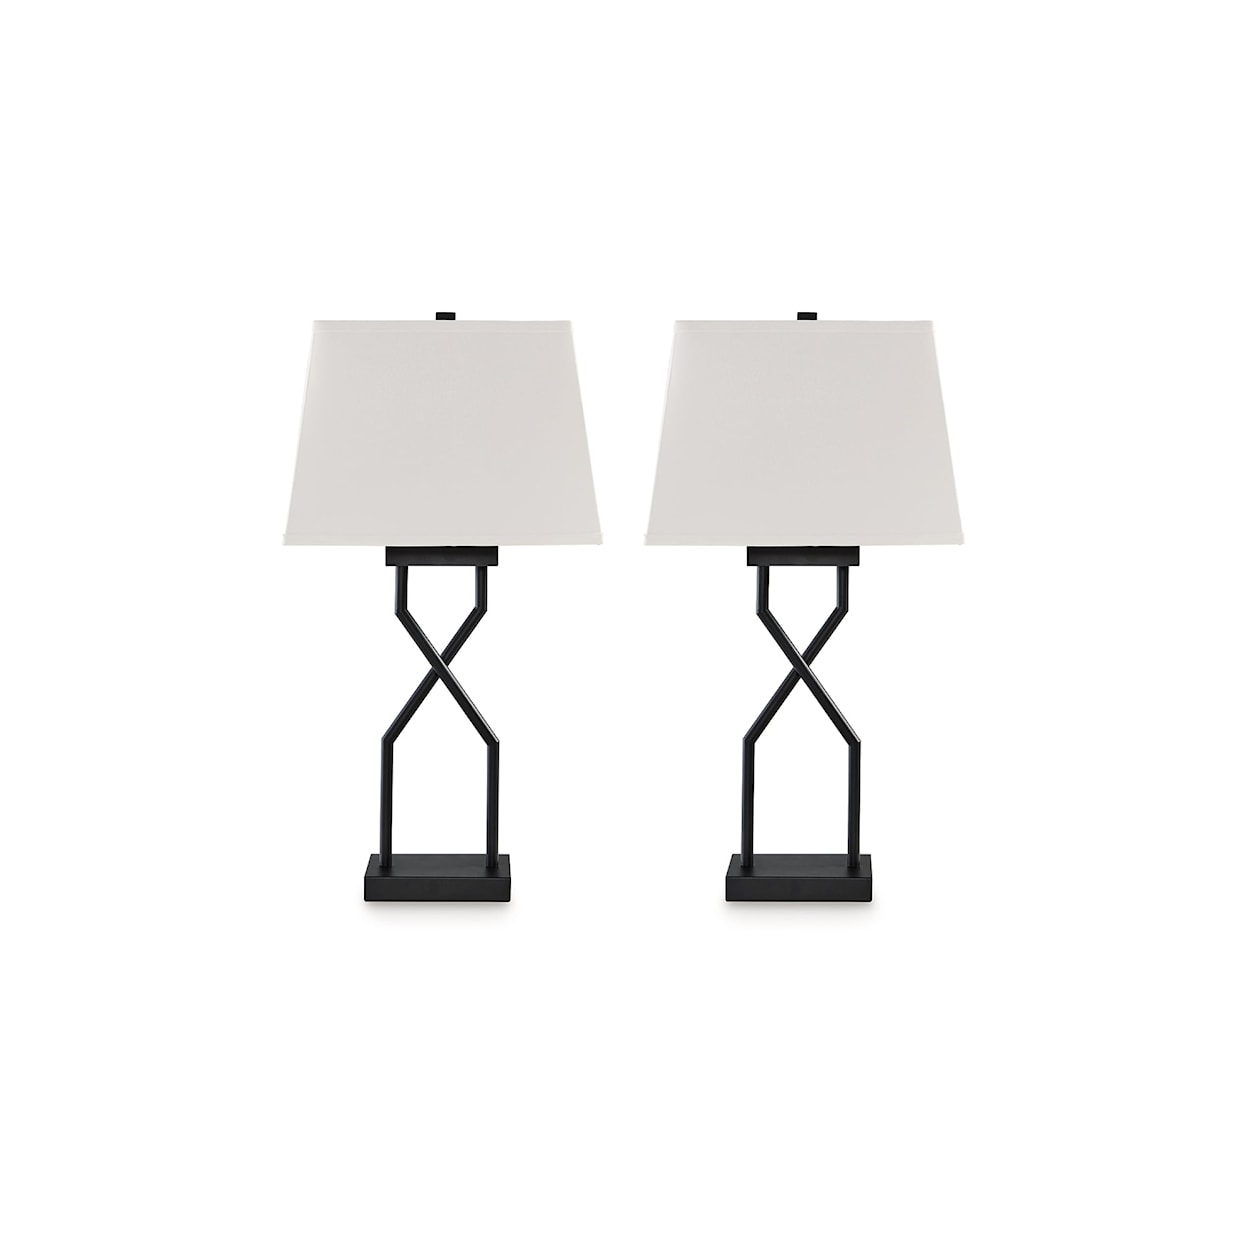 Benchcraft Brookthrone Metal Table Lamp (Set of 2)